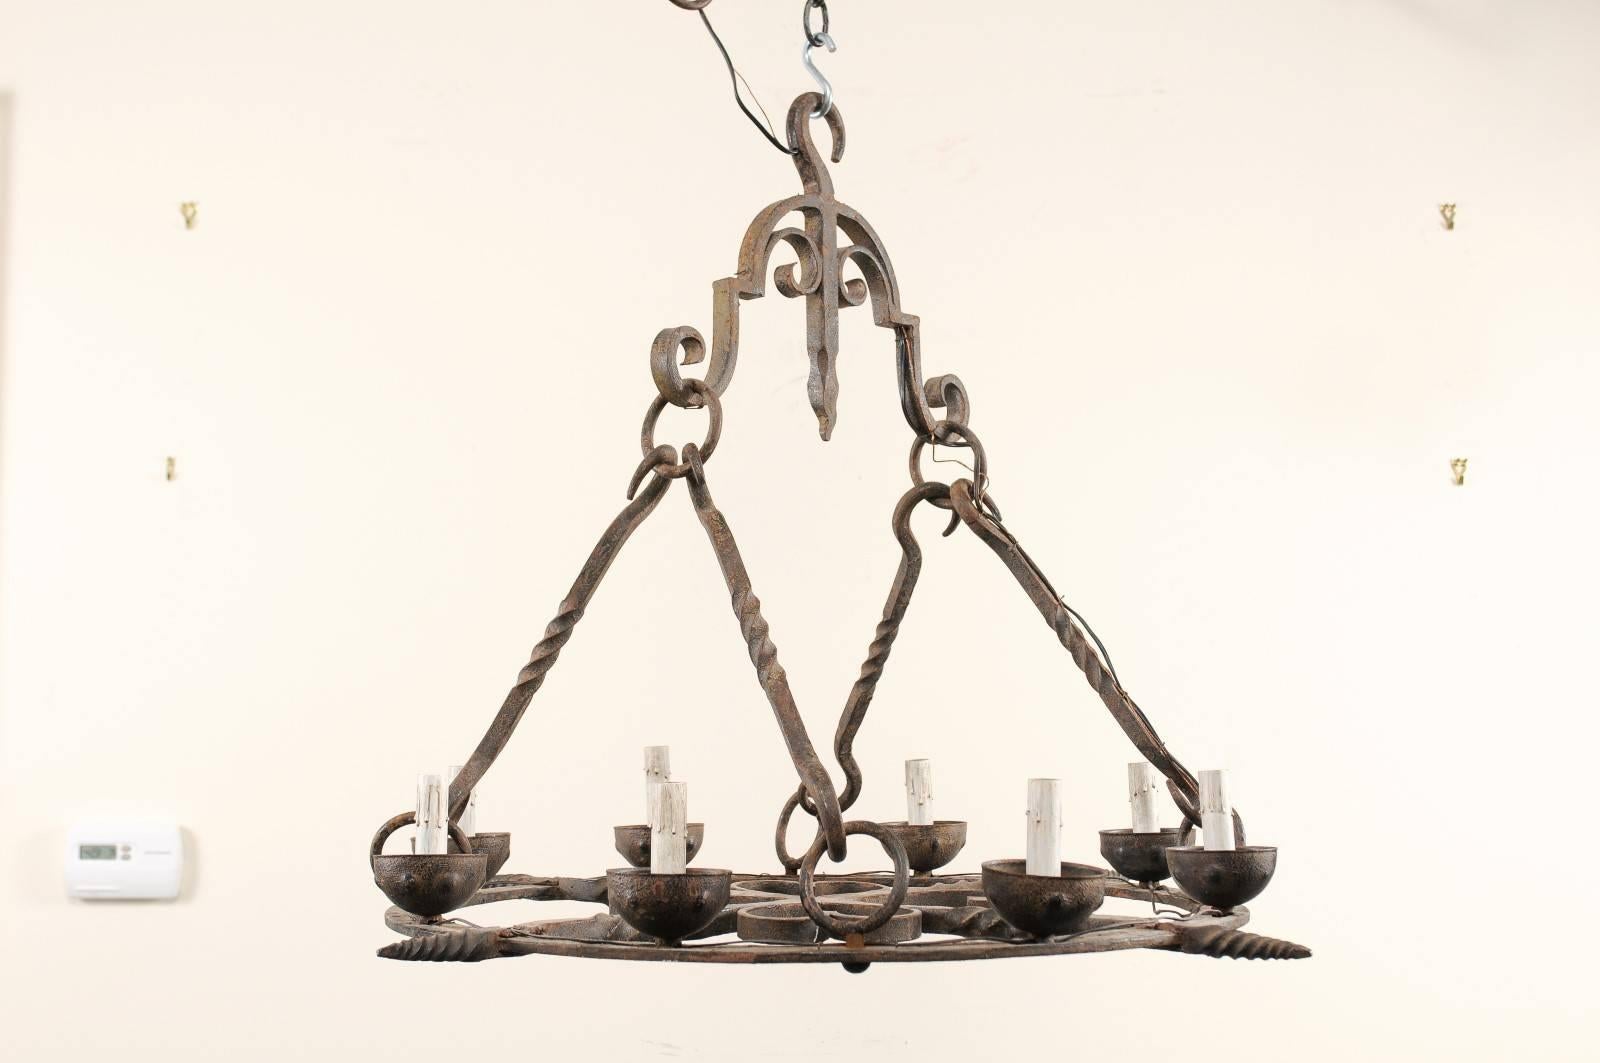 Rustic French Eight-Light Hand-Forged Iron Circular Chandelier w/Beautiful Suspension For Sale